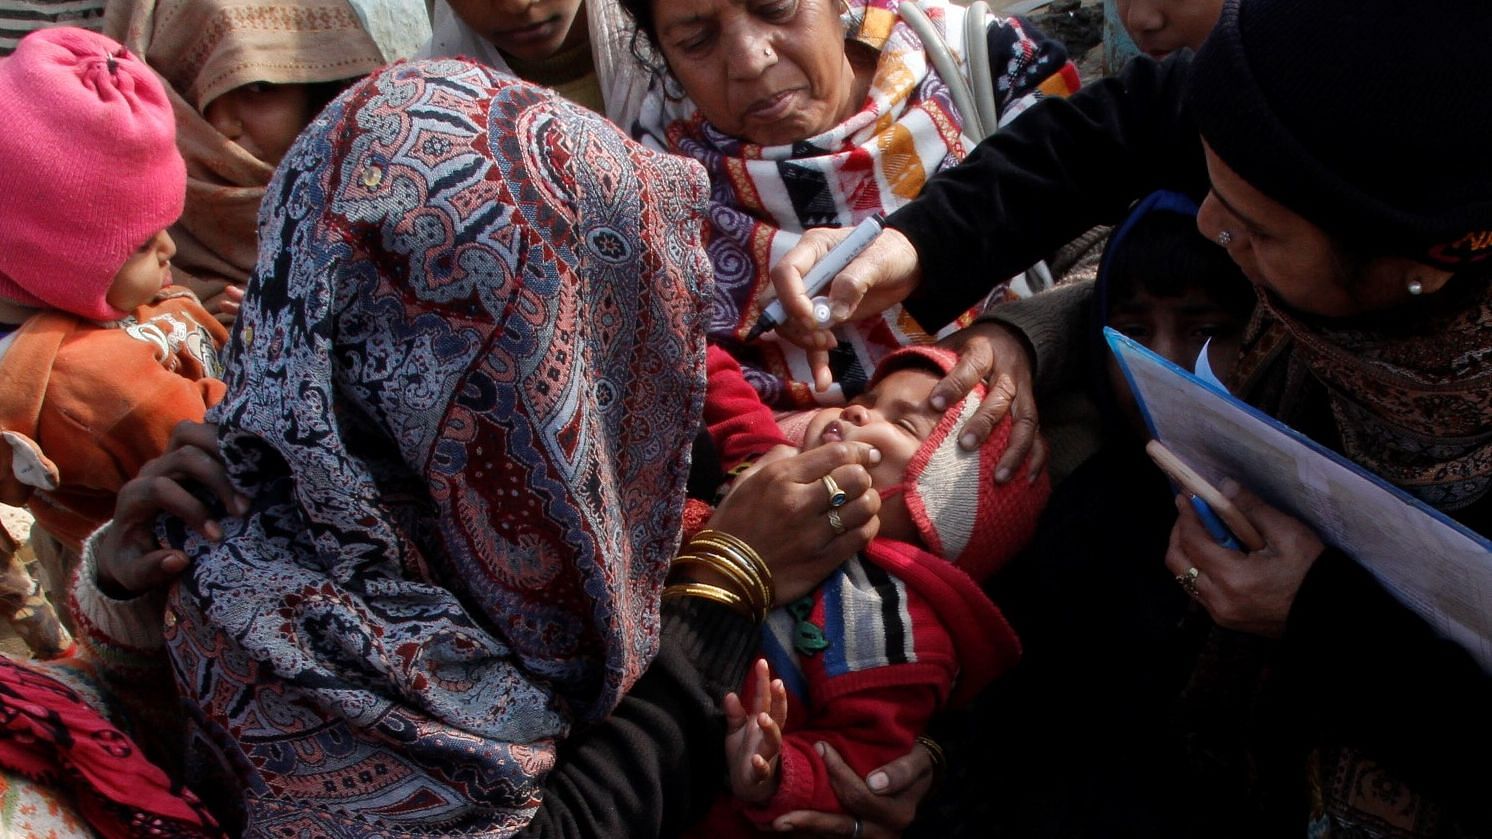 Health workers in UP giving Polio immunisation to a child